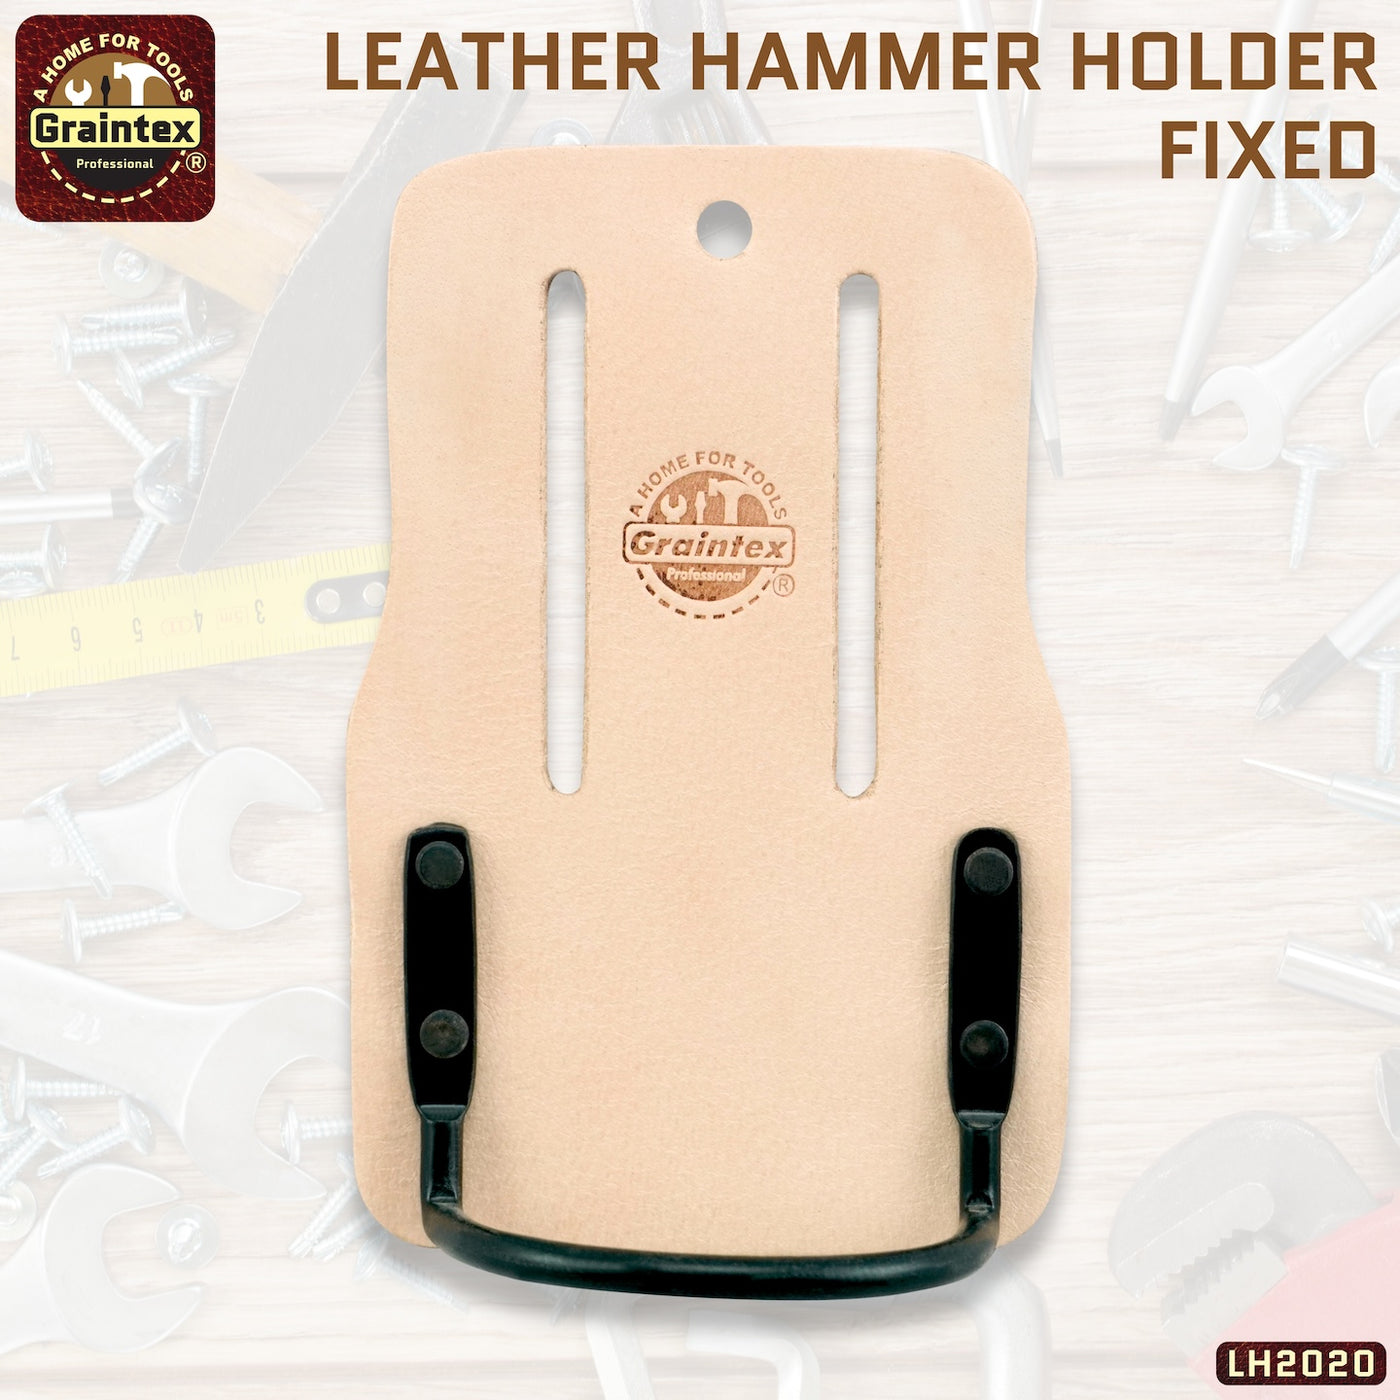 LH2020 :: LEATHER HAMMER HOLDER FIXED